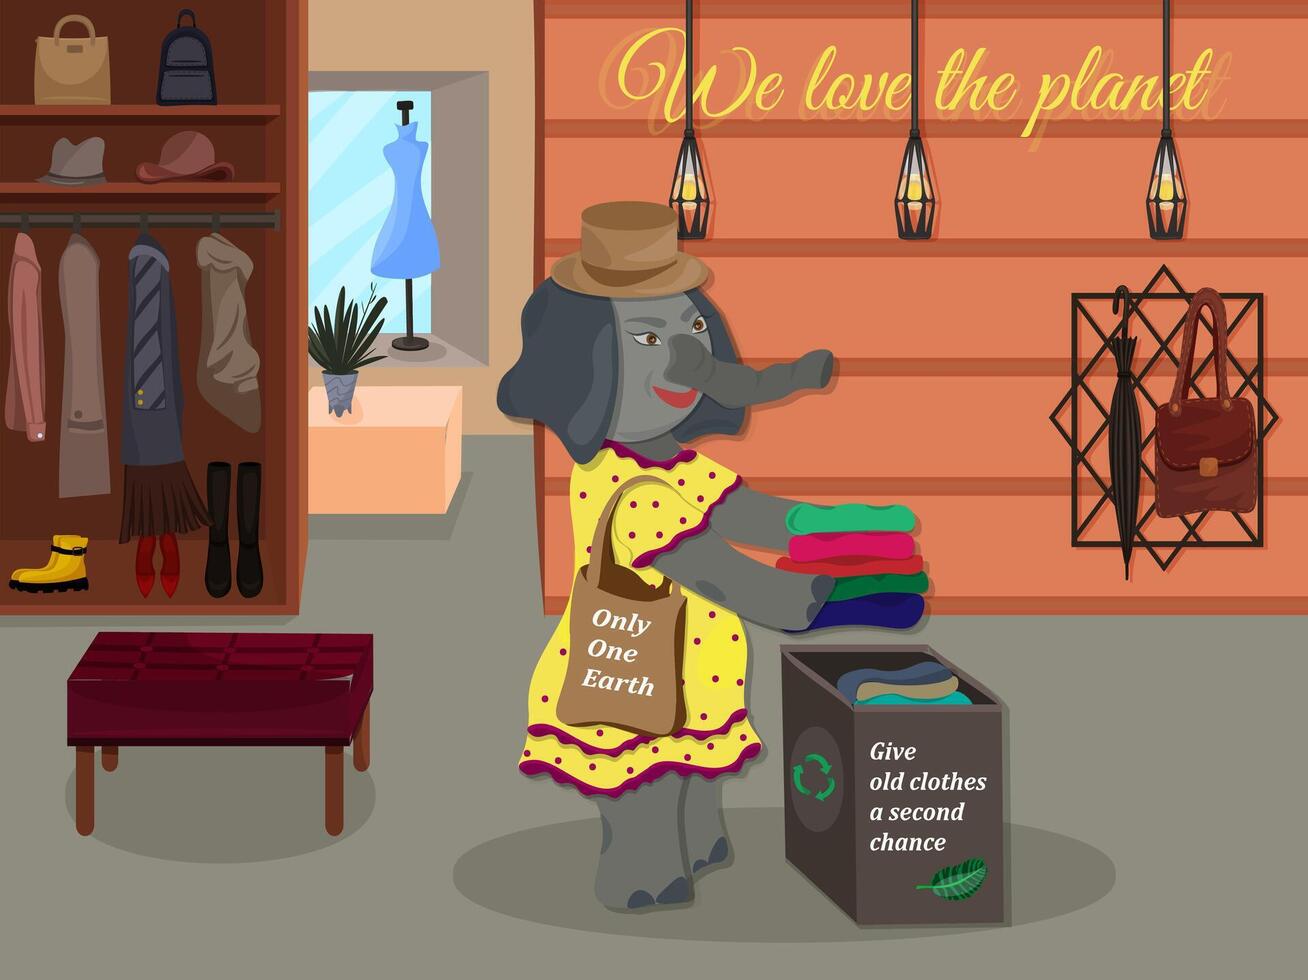 Character design. The elephant in the store recycles old things. Interior of clothing and shoe stores. Showcase with mannequins. Eco-friendly lifestyle. Vector illustration in cartoon style.